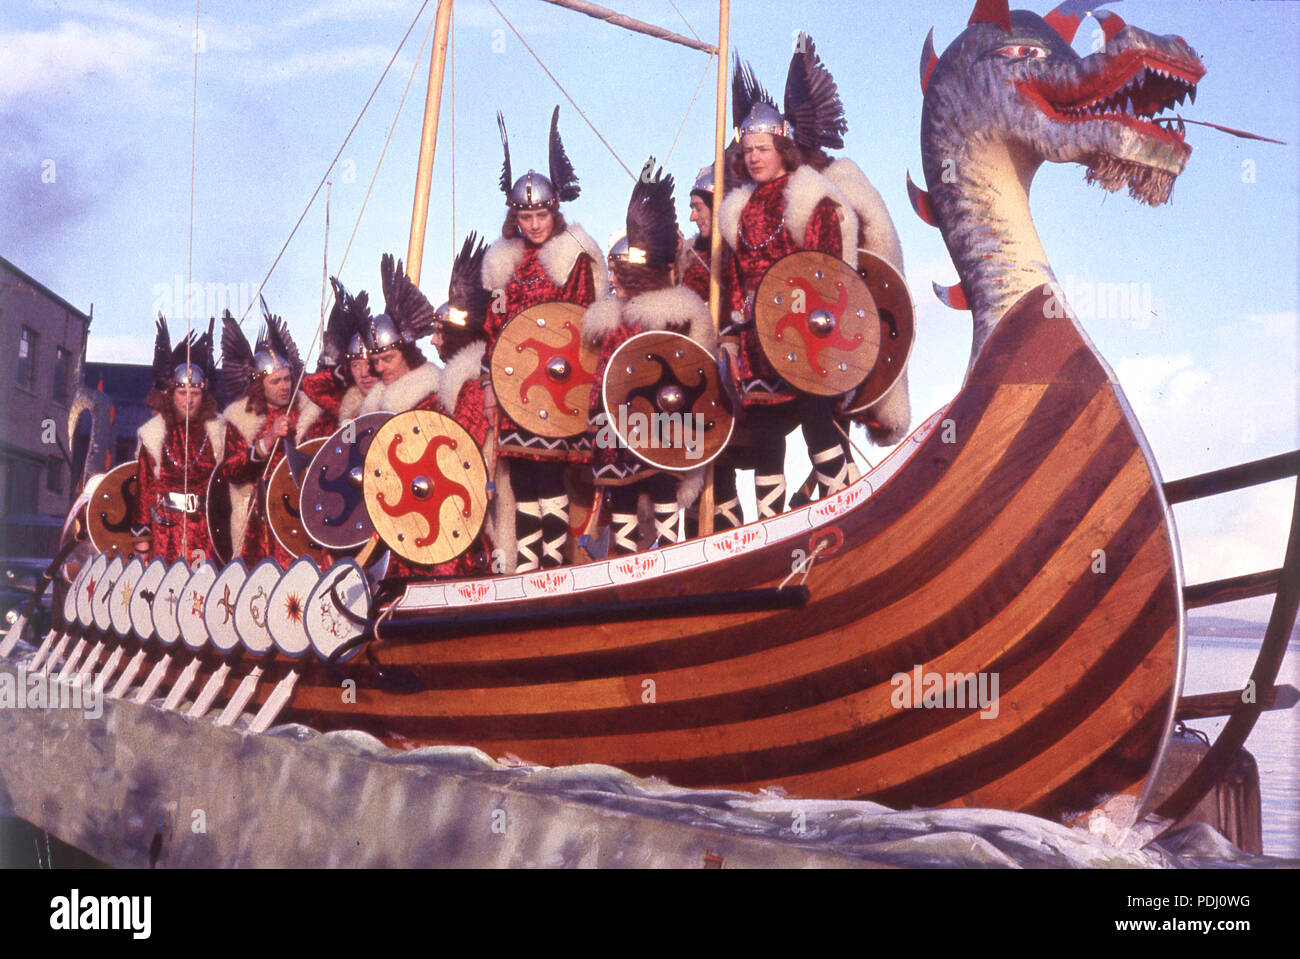 1960s people dressed up in Viking costumes, with helmets and shields, standing on a reconstrution of Viking sea transport, a longship, a long rowing boat. The vikings were Norse seafarers who invaded and raided Britain between the 8th-11th centuries and had a reputation as fierce warriors. Stock Photo